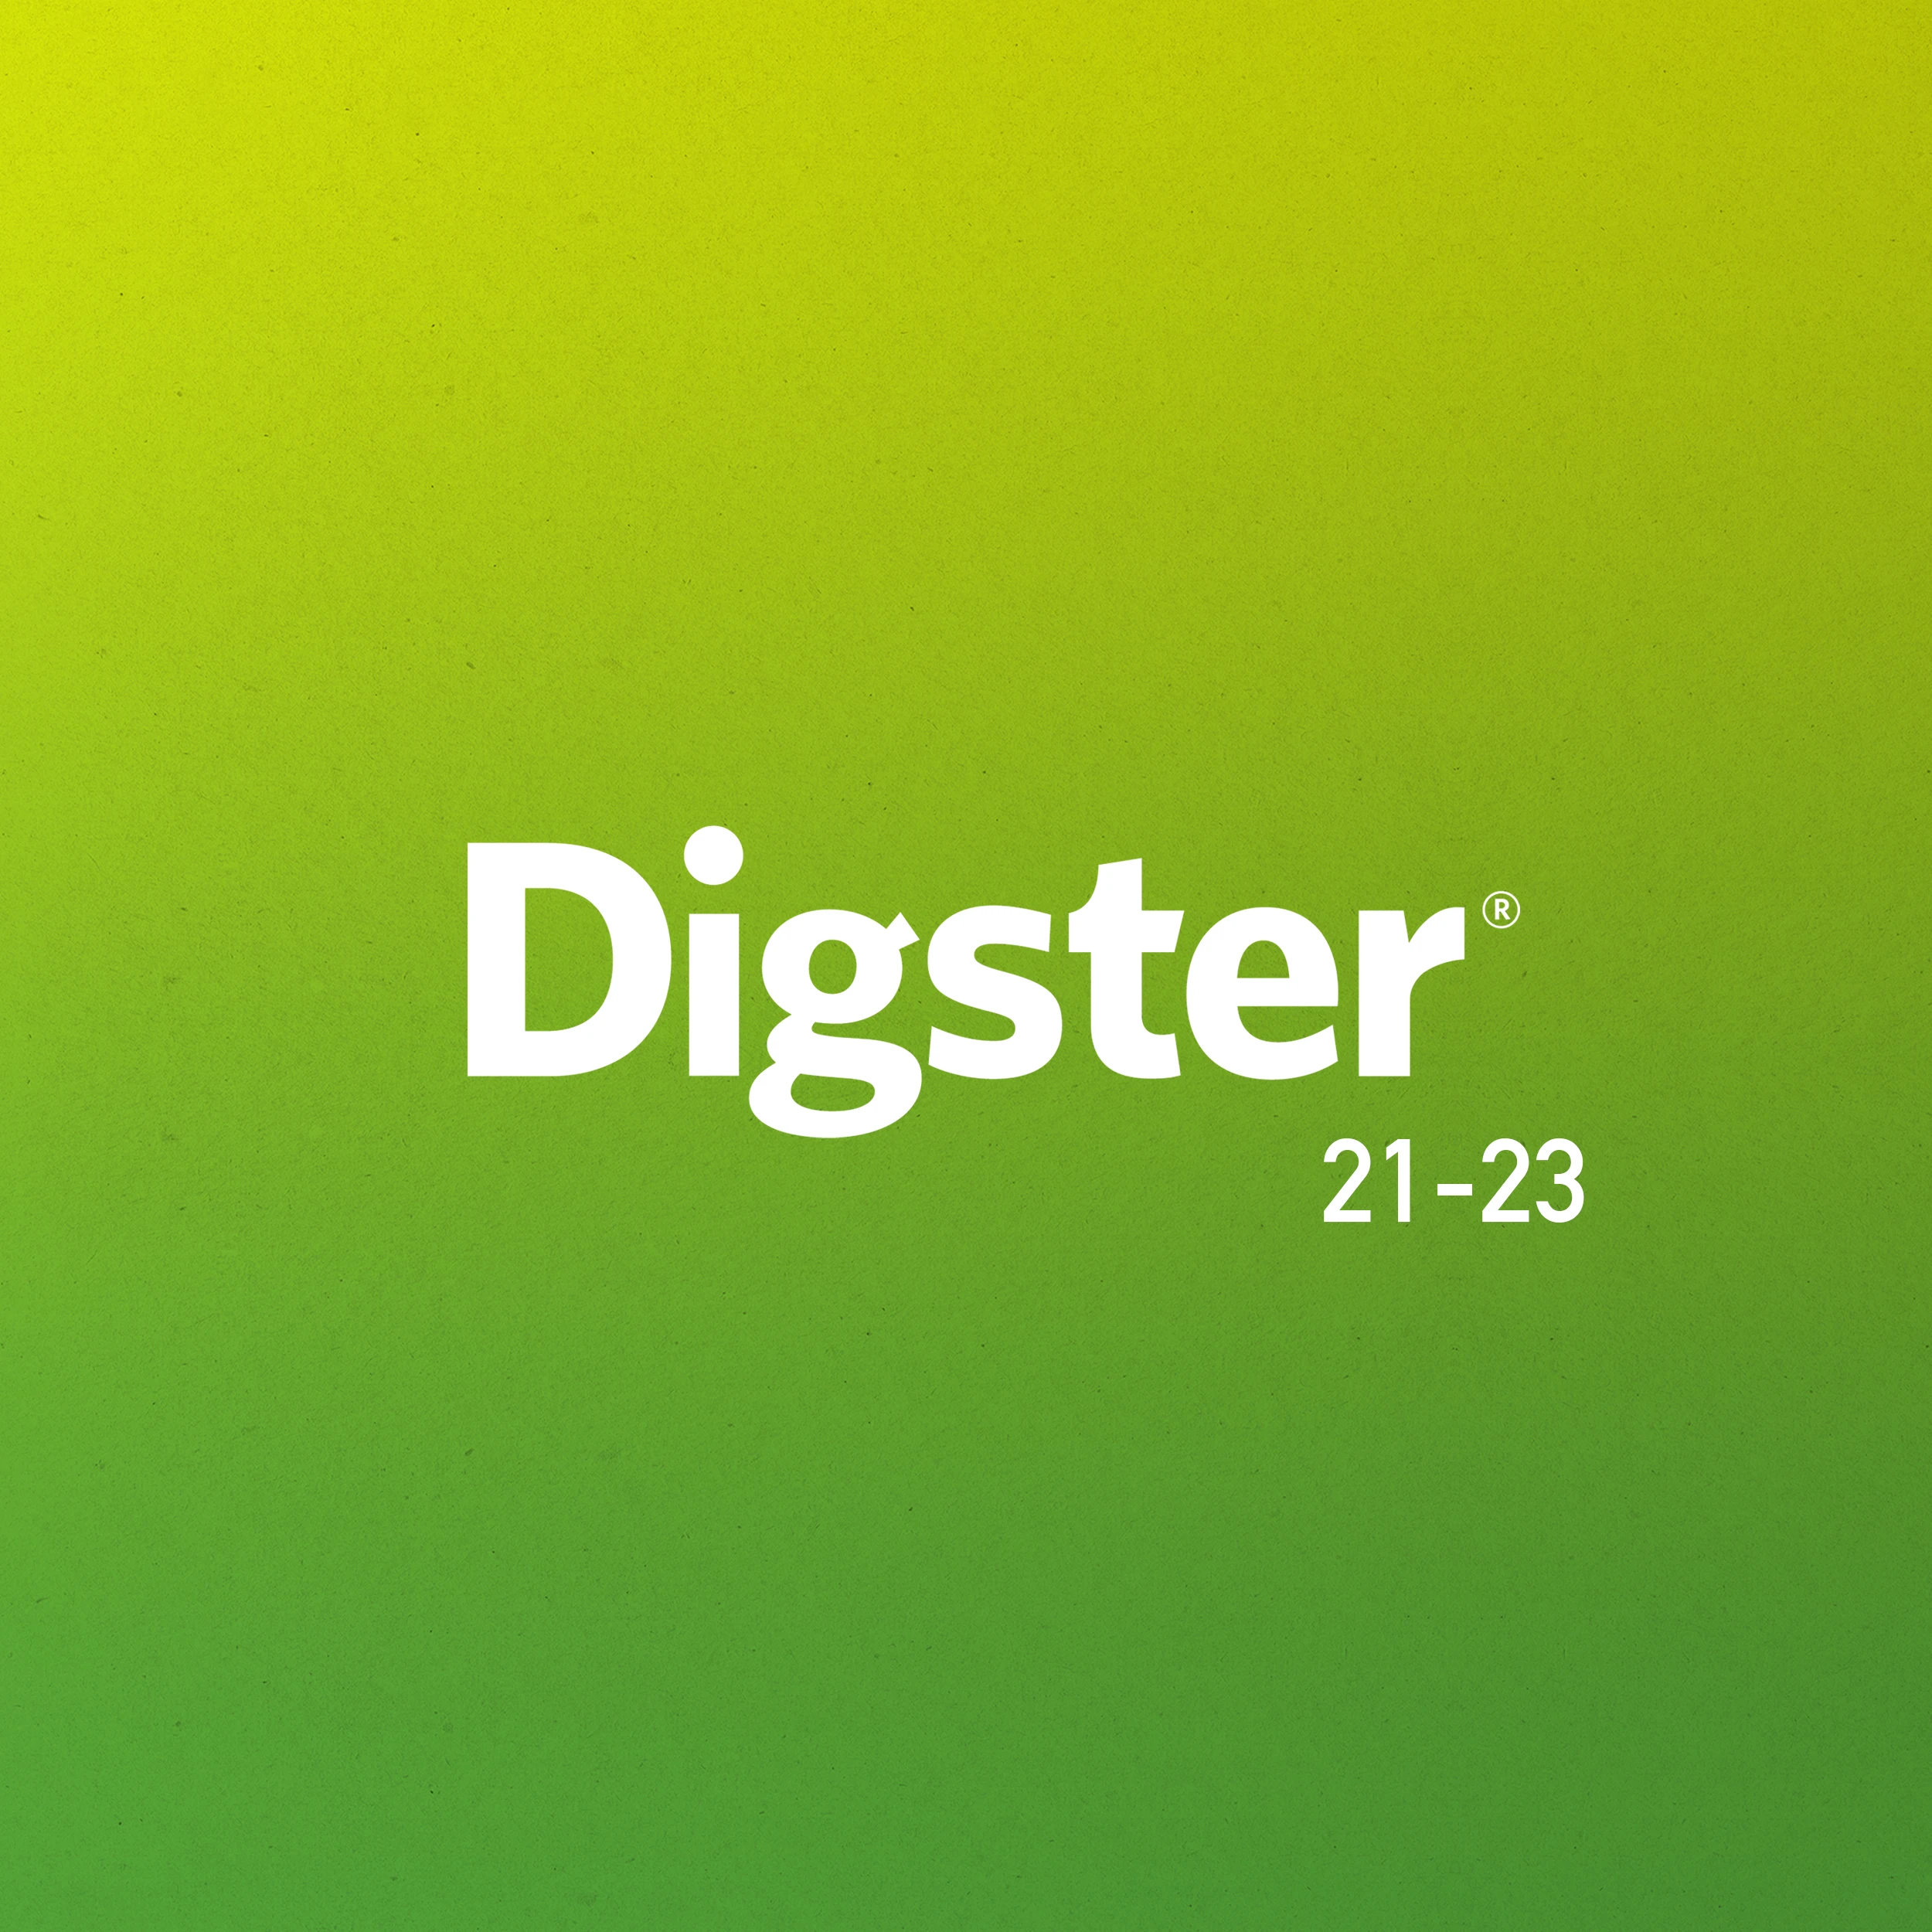 projet : Digster - 21-23